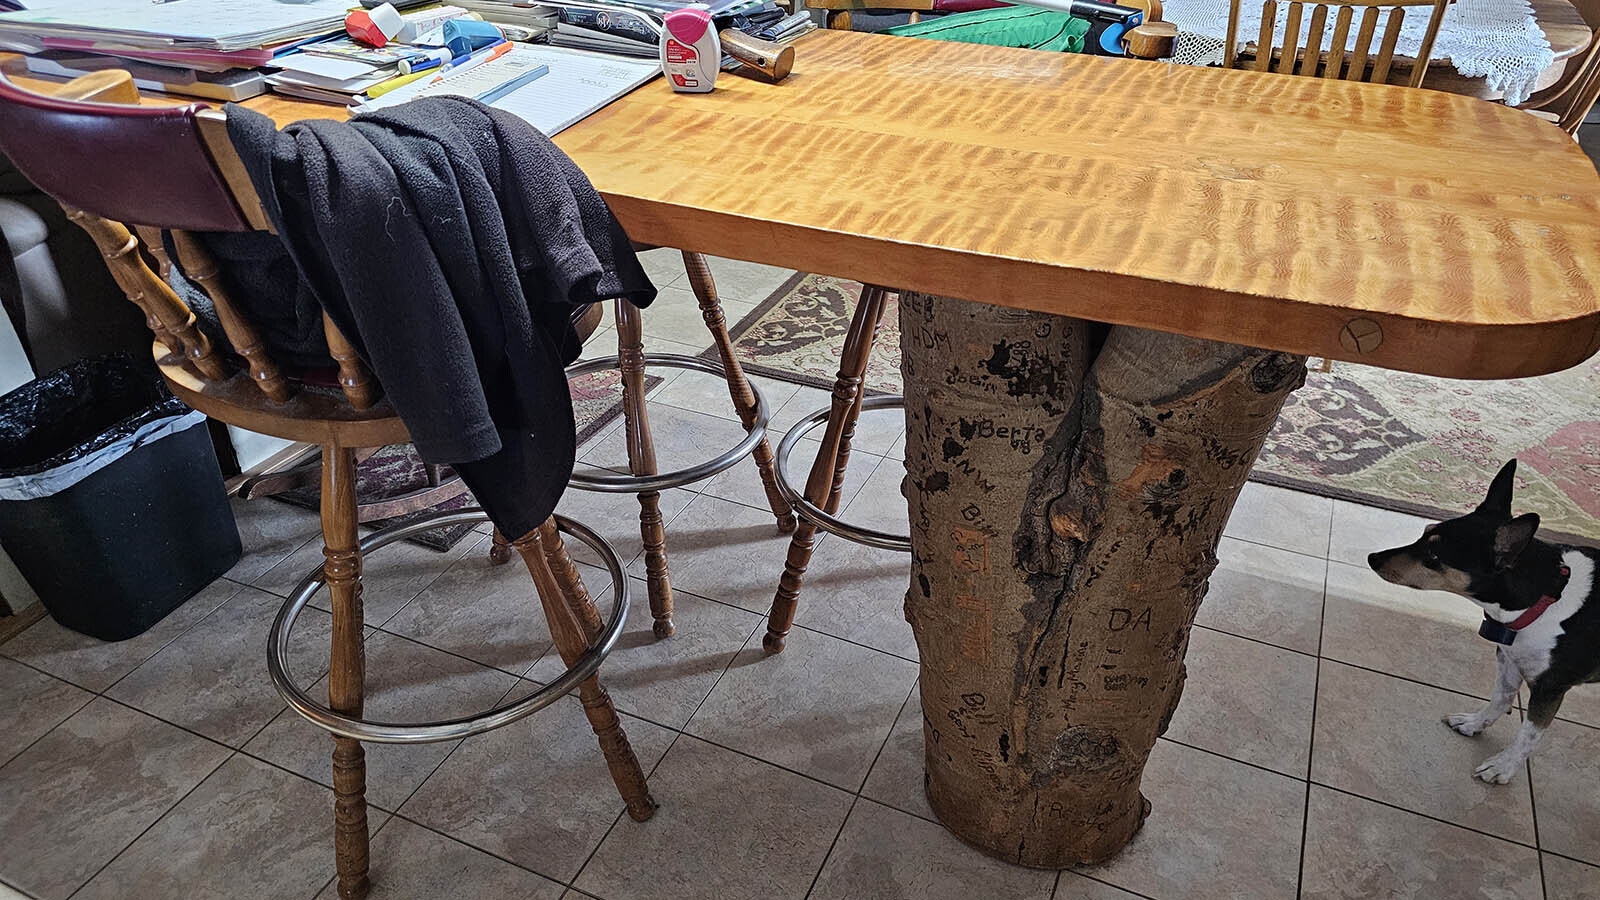 This table in Pat Burroughs’ home was made by her father from a pine tree in the surrounding area, while the stump holding it up is aspen. Over the years, guests have been invited to carve their initials in the stump.